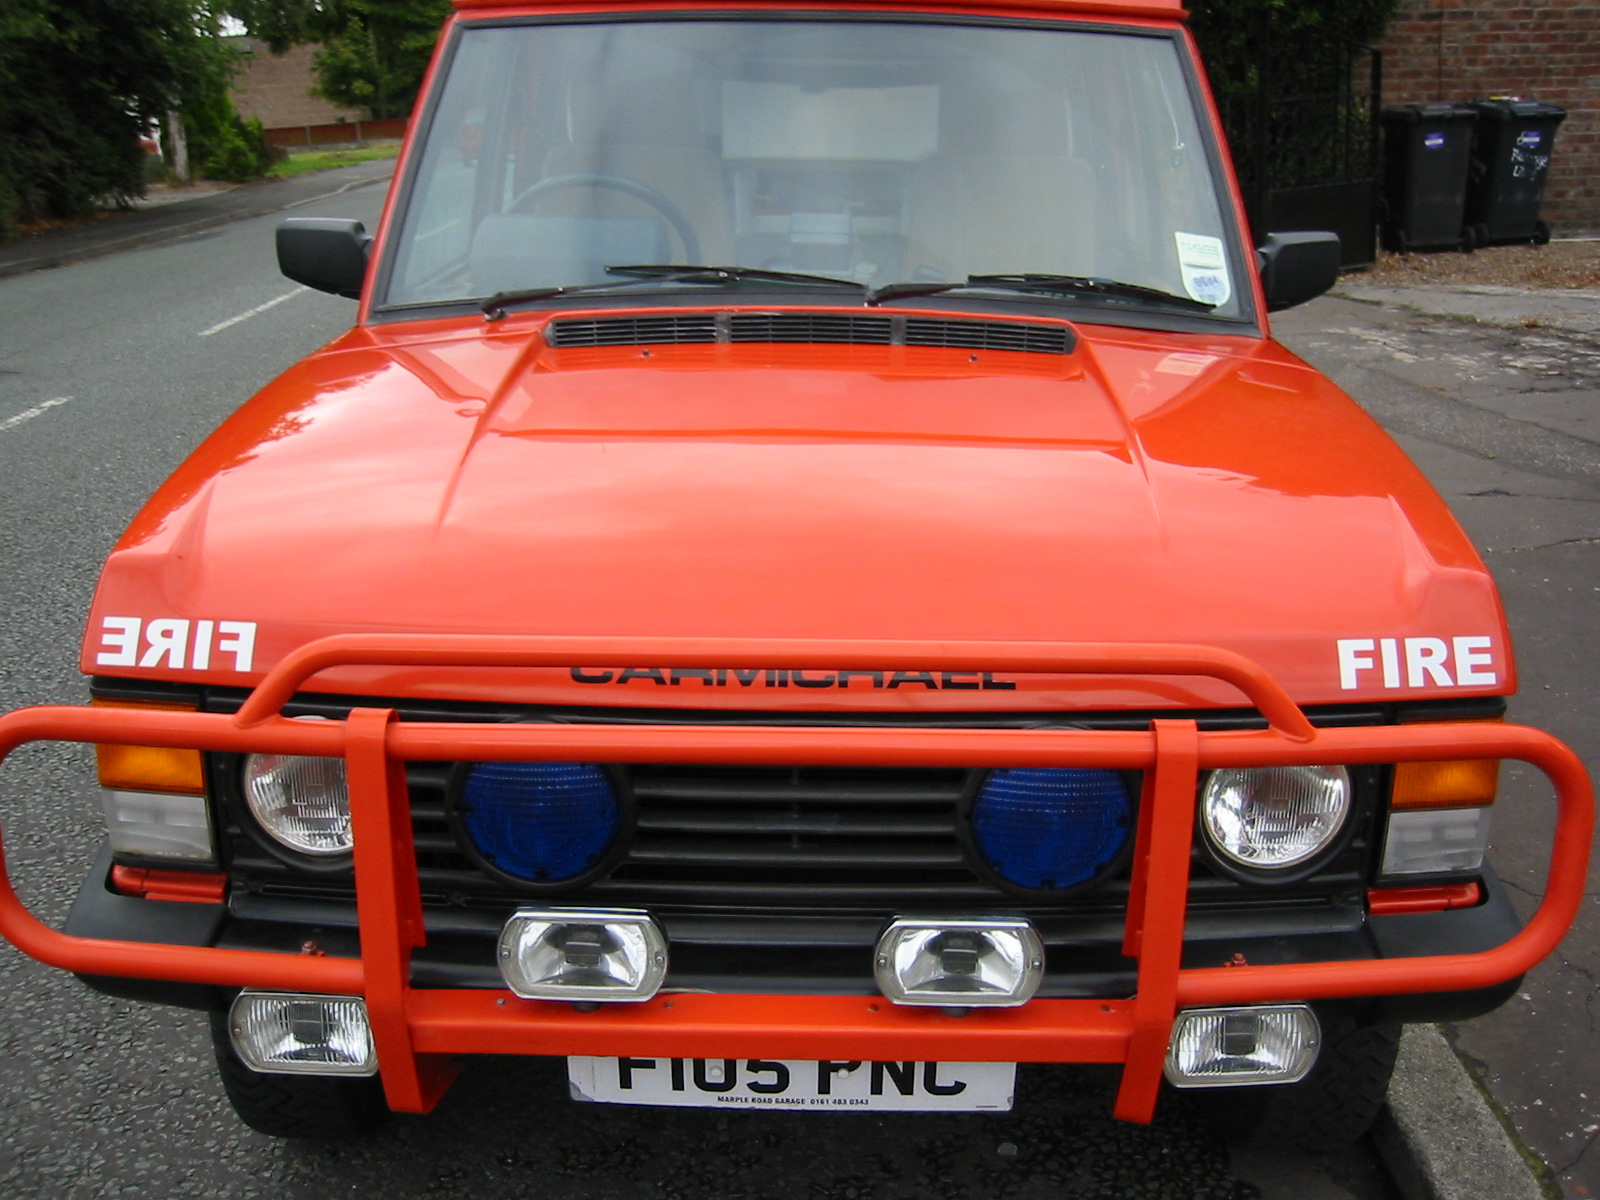 The Range Rover Classic thread: - Page 151 - Classic Cars and Yesterday's Heroes - PistonHeads